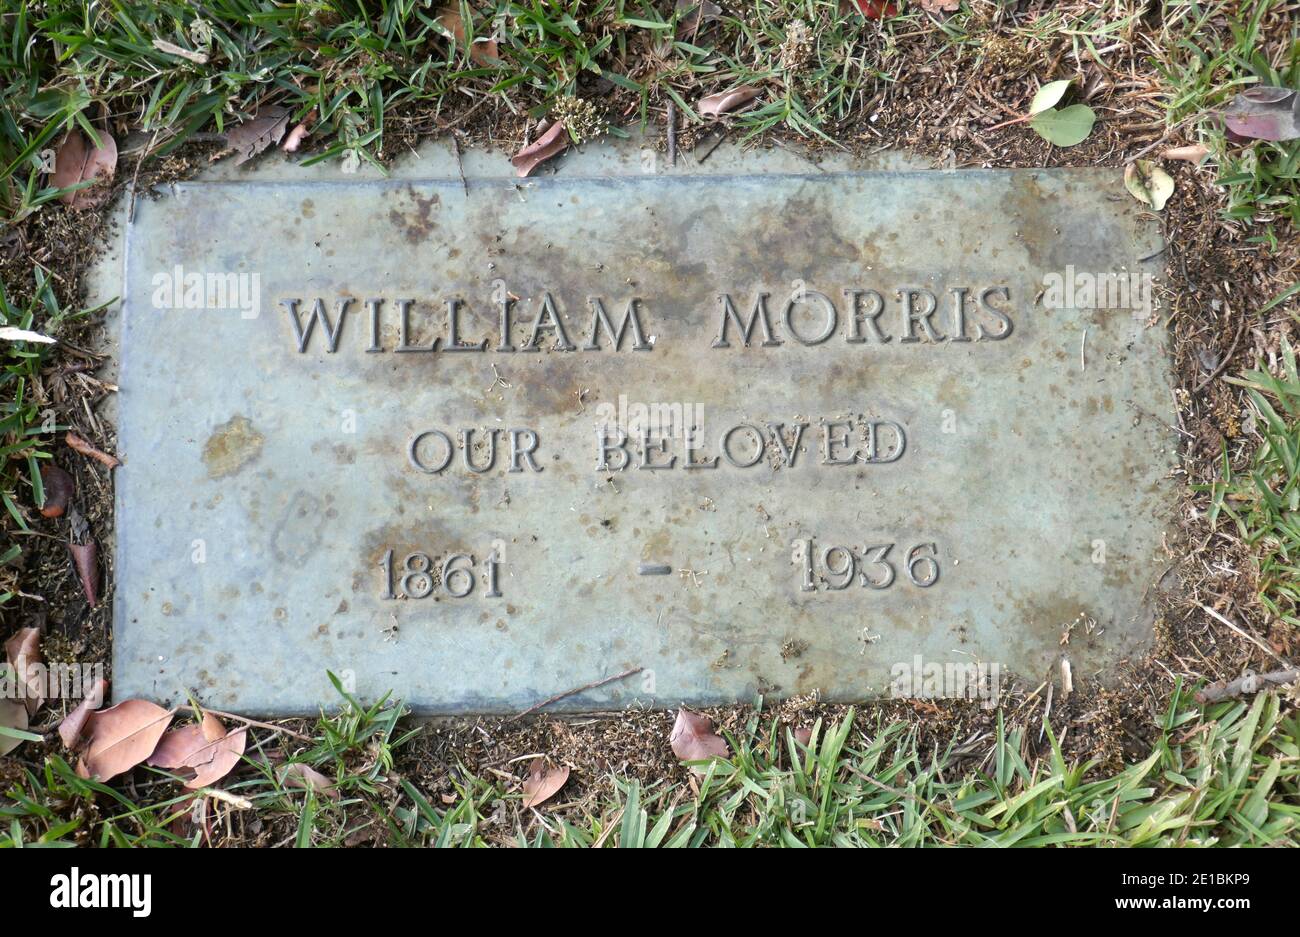 Los Angeles, California, USA 5th January 2021 A general view of atmosphere of actor William Morris Grave at Hollywood Forever Cemetery on January 5, 2021 in Los Angeles, California, USA. Photo by Barry King/Alamy Stock Photo Stock Photo